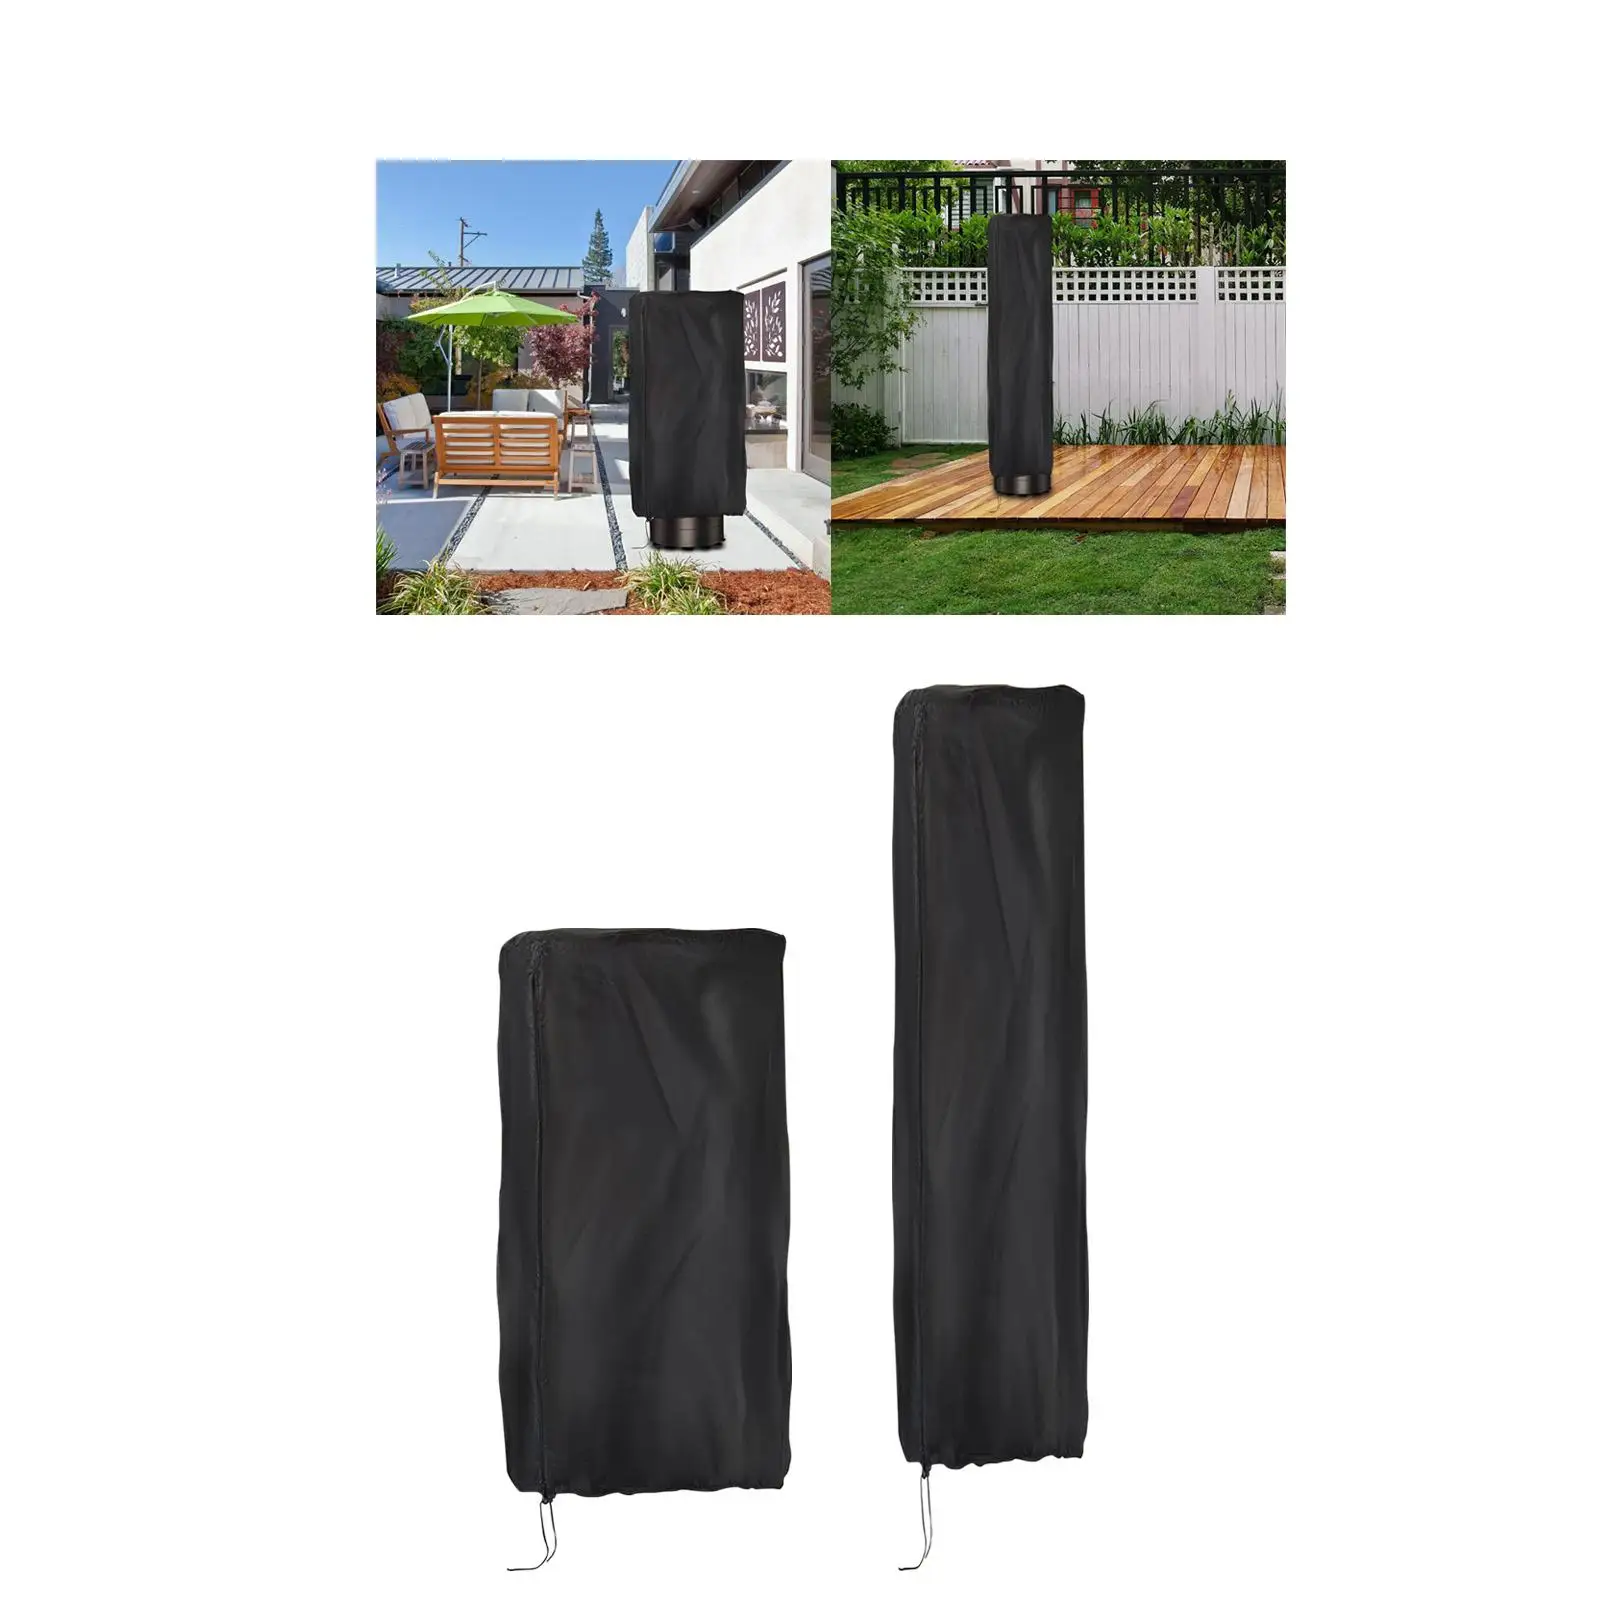 Punching Bag Cover Standing Cover Sun Protection Waterproof for Indoor Outdoor